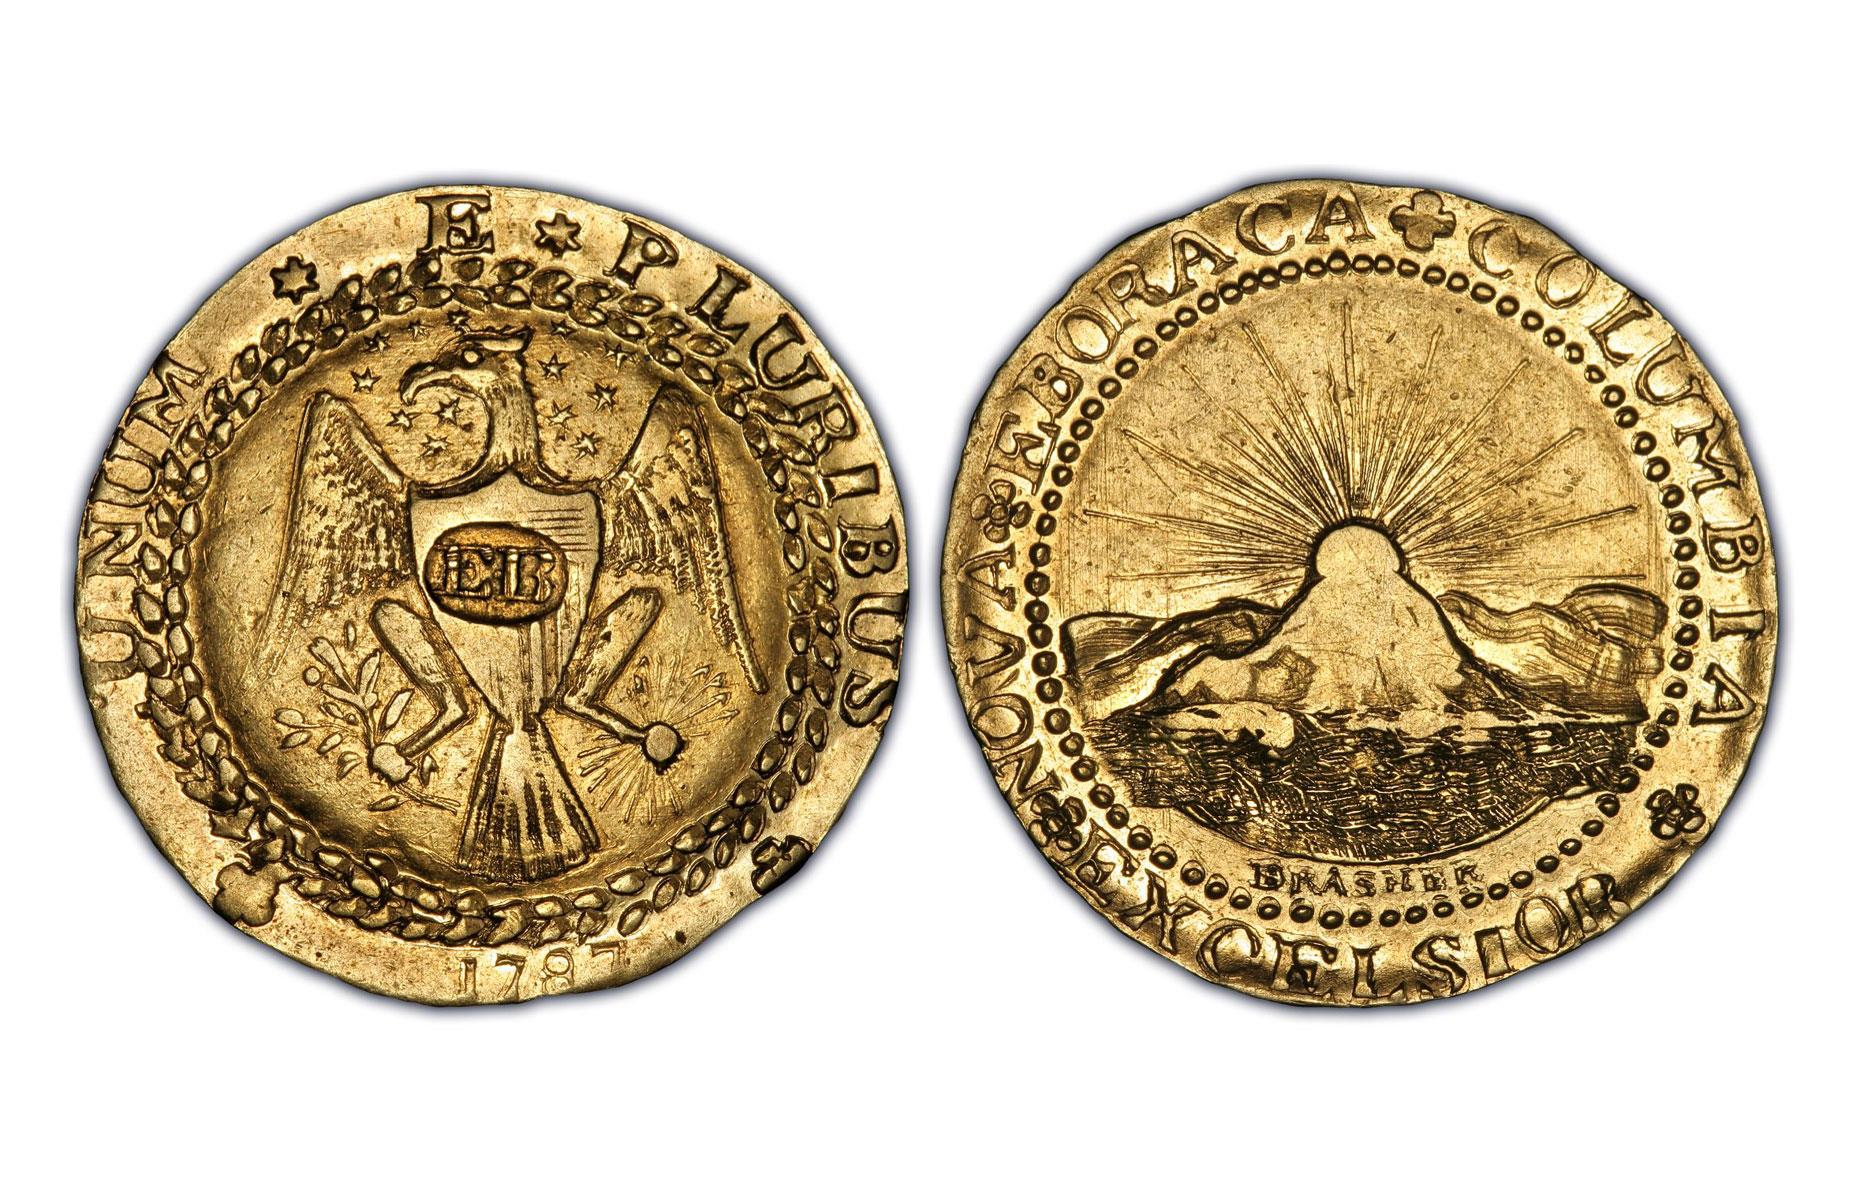 1787 Brasher Doubloon - EB on Breast, privately minted: $7,400,000 (£6m)